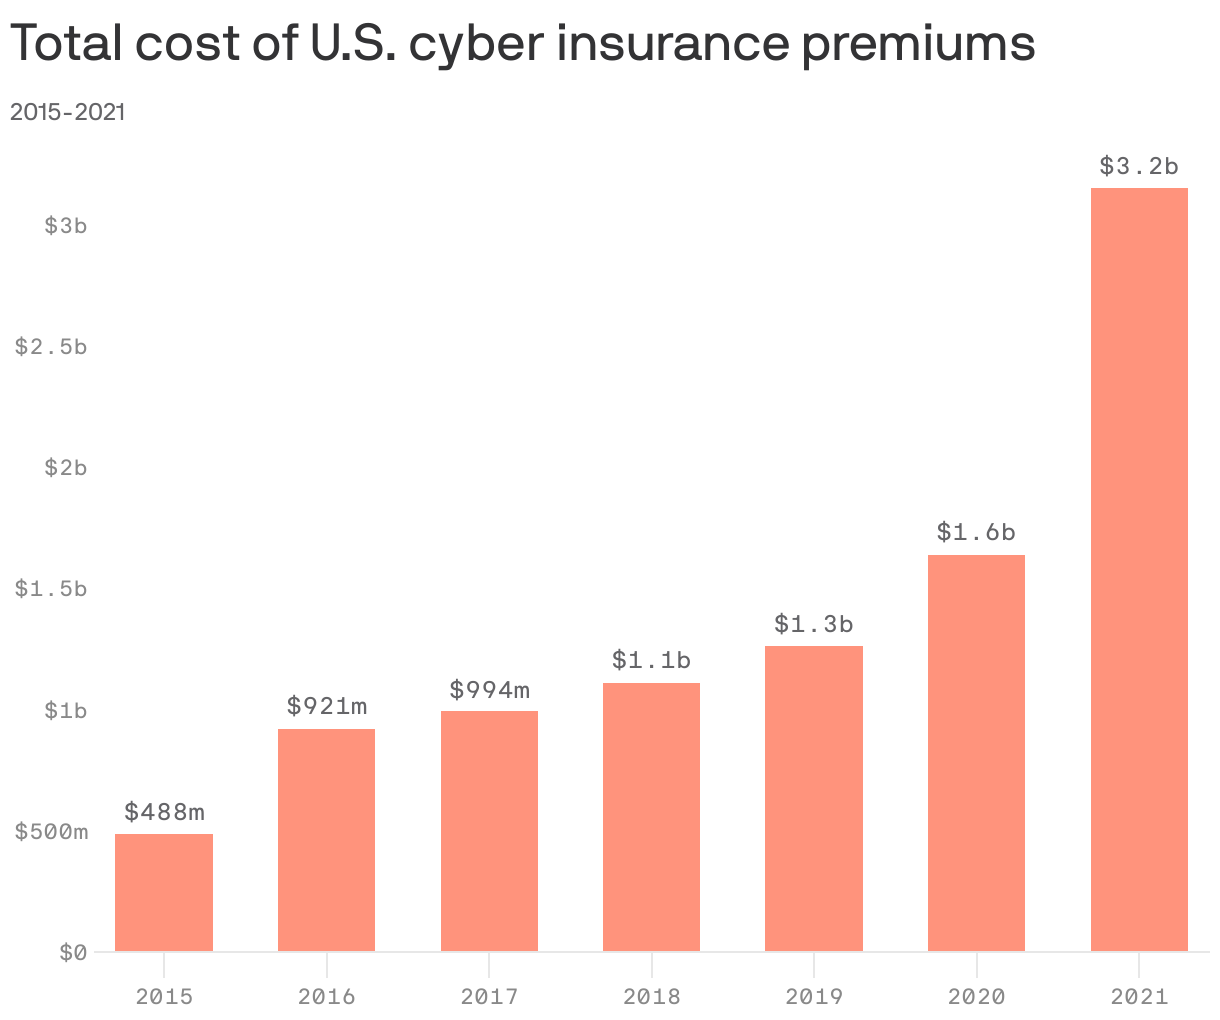 Total cost of U.S. cyber insurance premiums